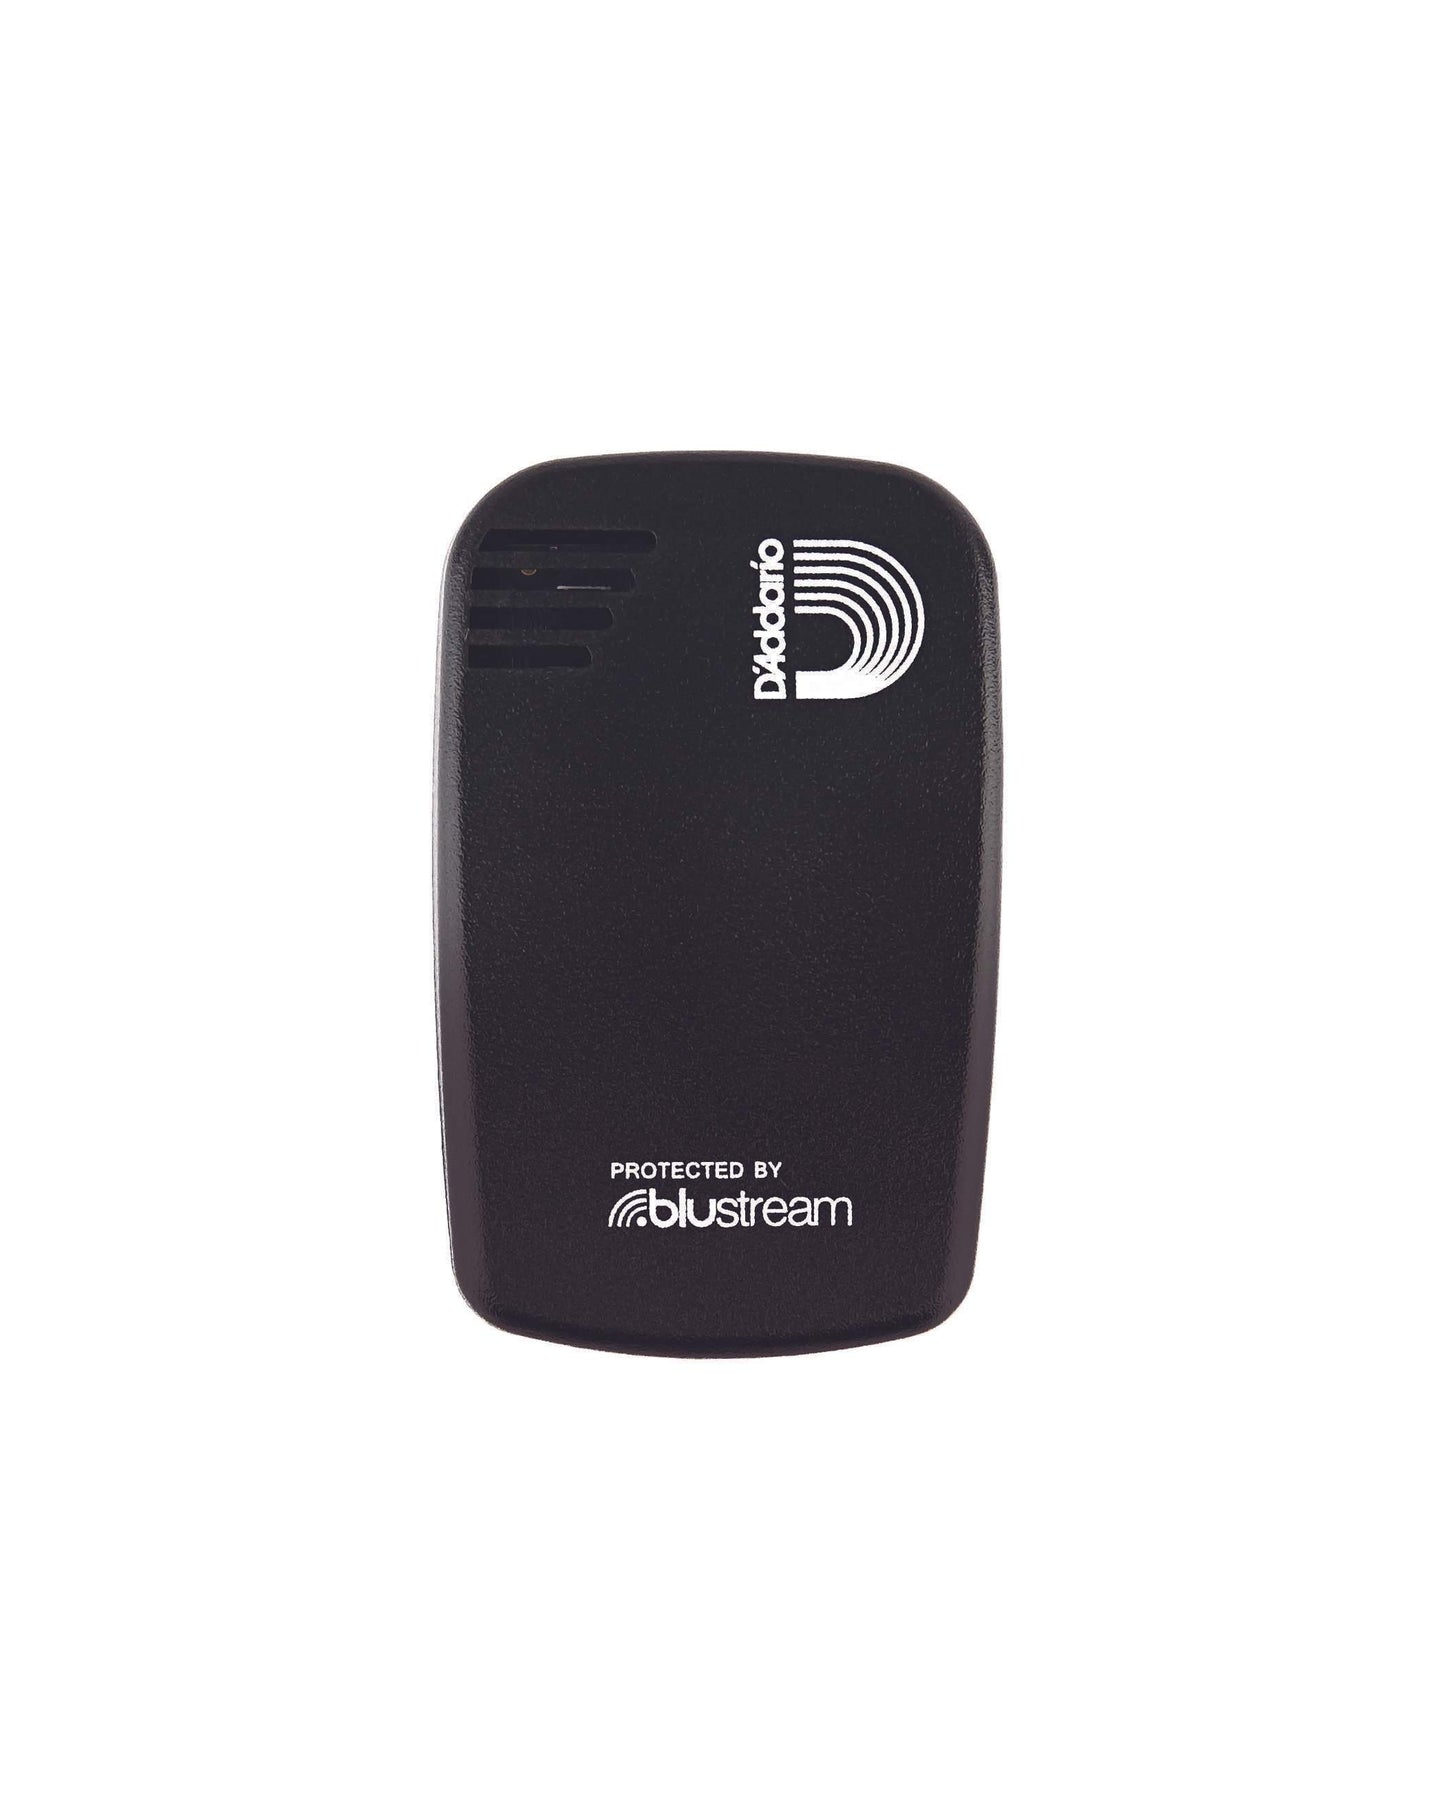 Image 1 of D'Addario Planet Waves Humiditrak Bluetooth Humidity, Temperature & Impact Sensor - SKU# PWHTK01 : Product Type Accessories & Parts : Elderly Instruments